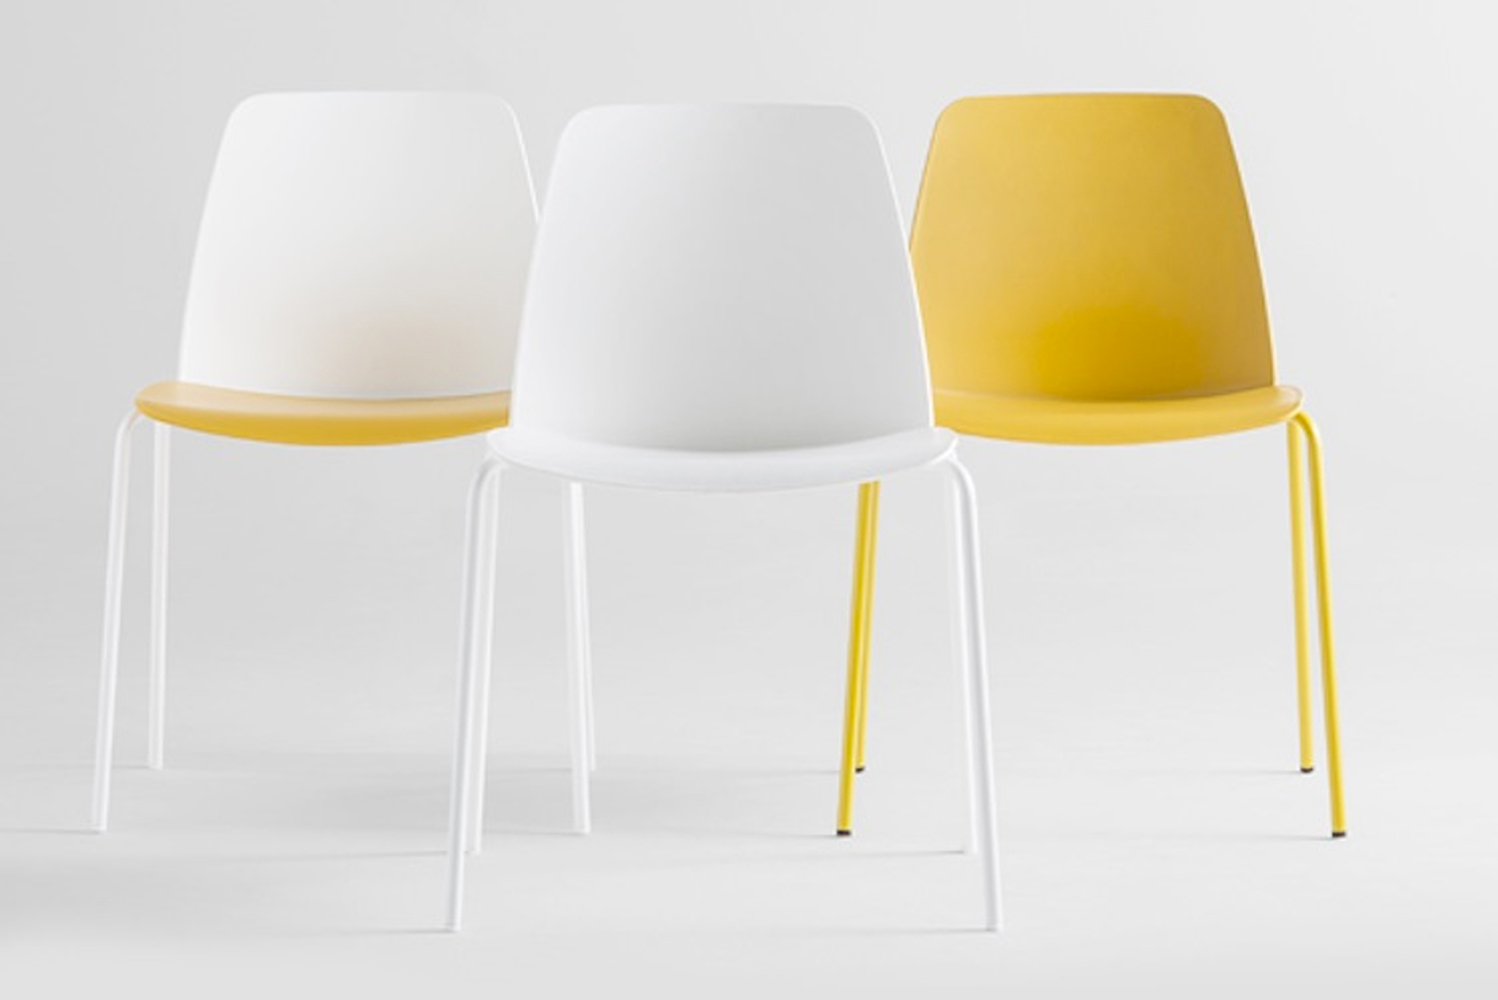 Introducing the Unnia range of chairs by Sandler Seating